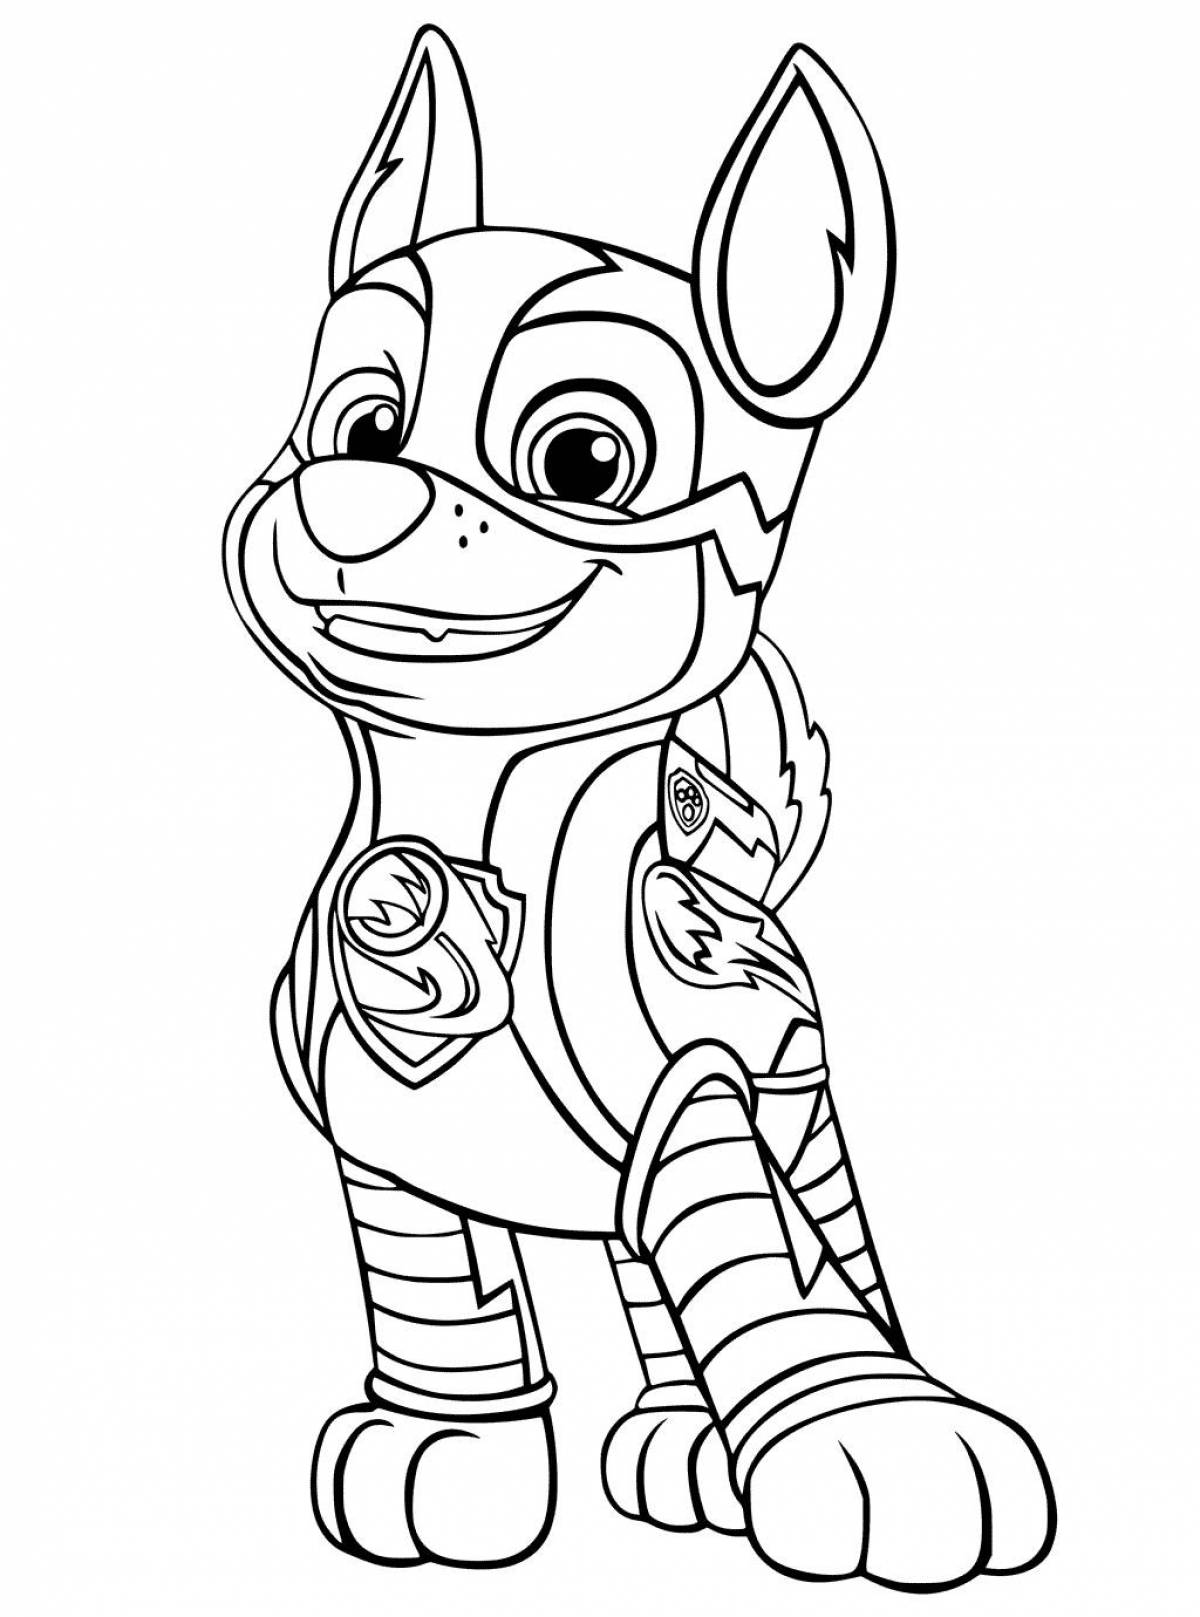 Paw patrol racer coloring page